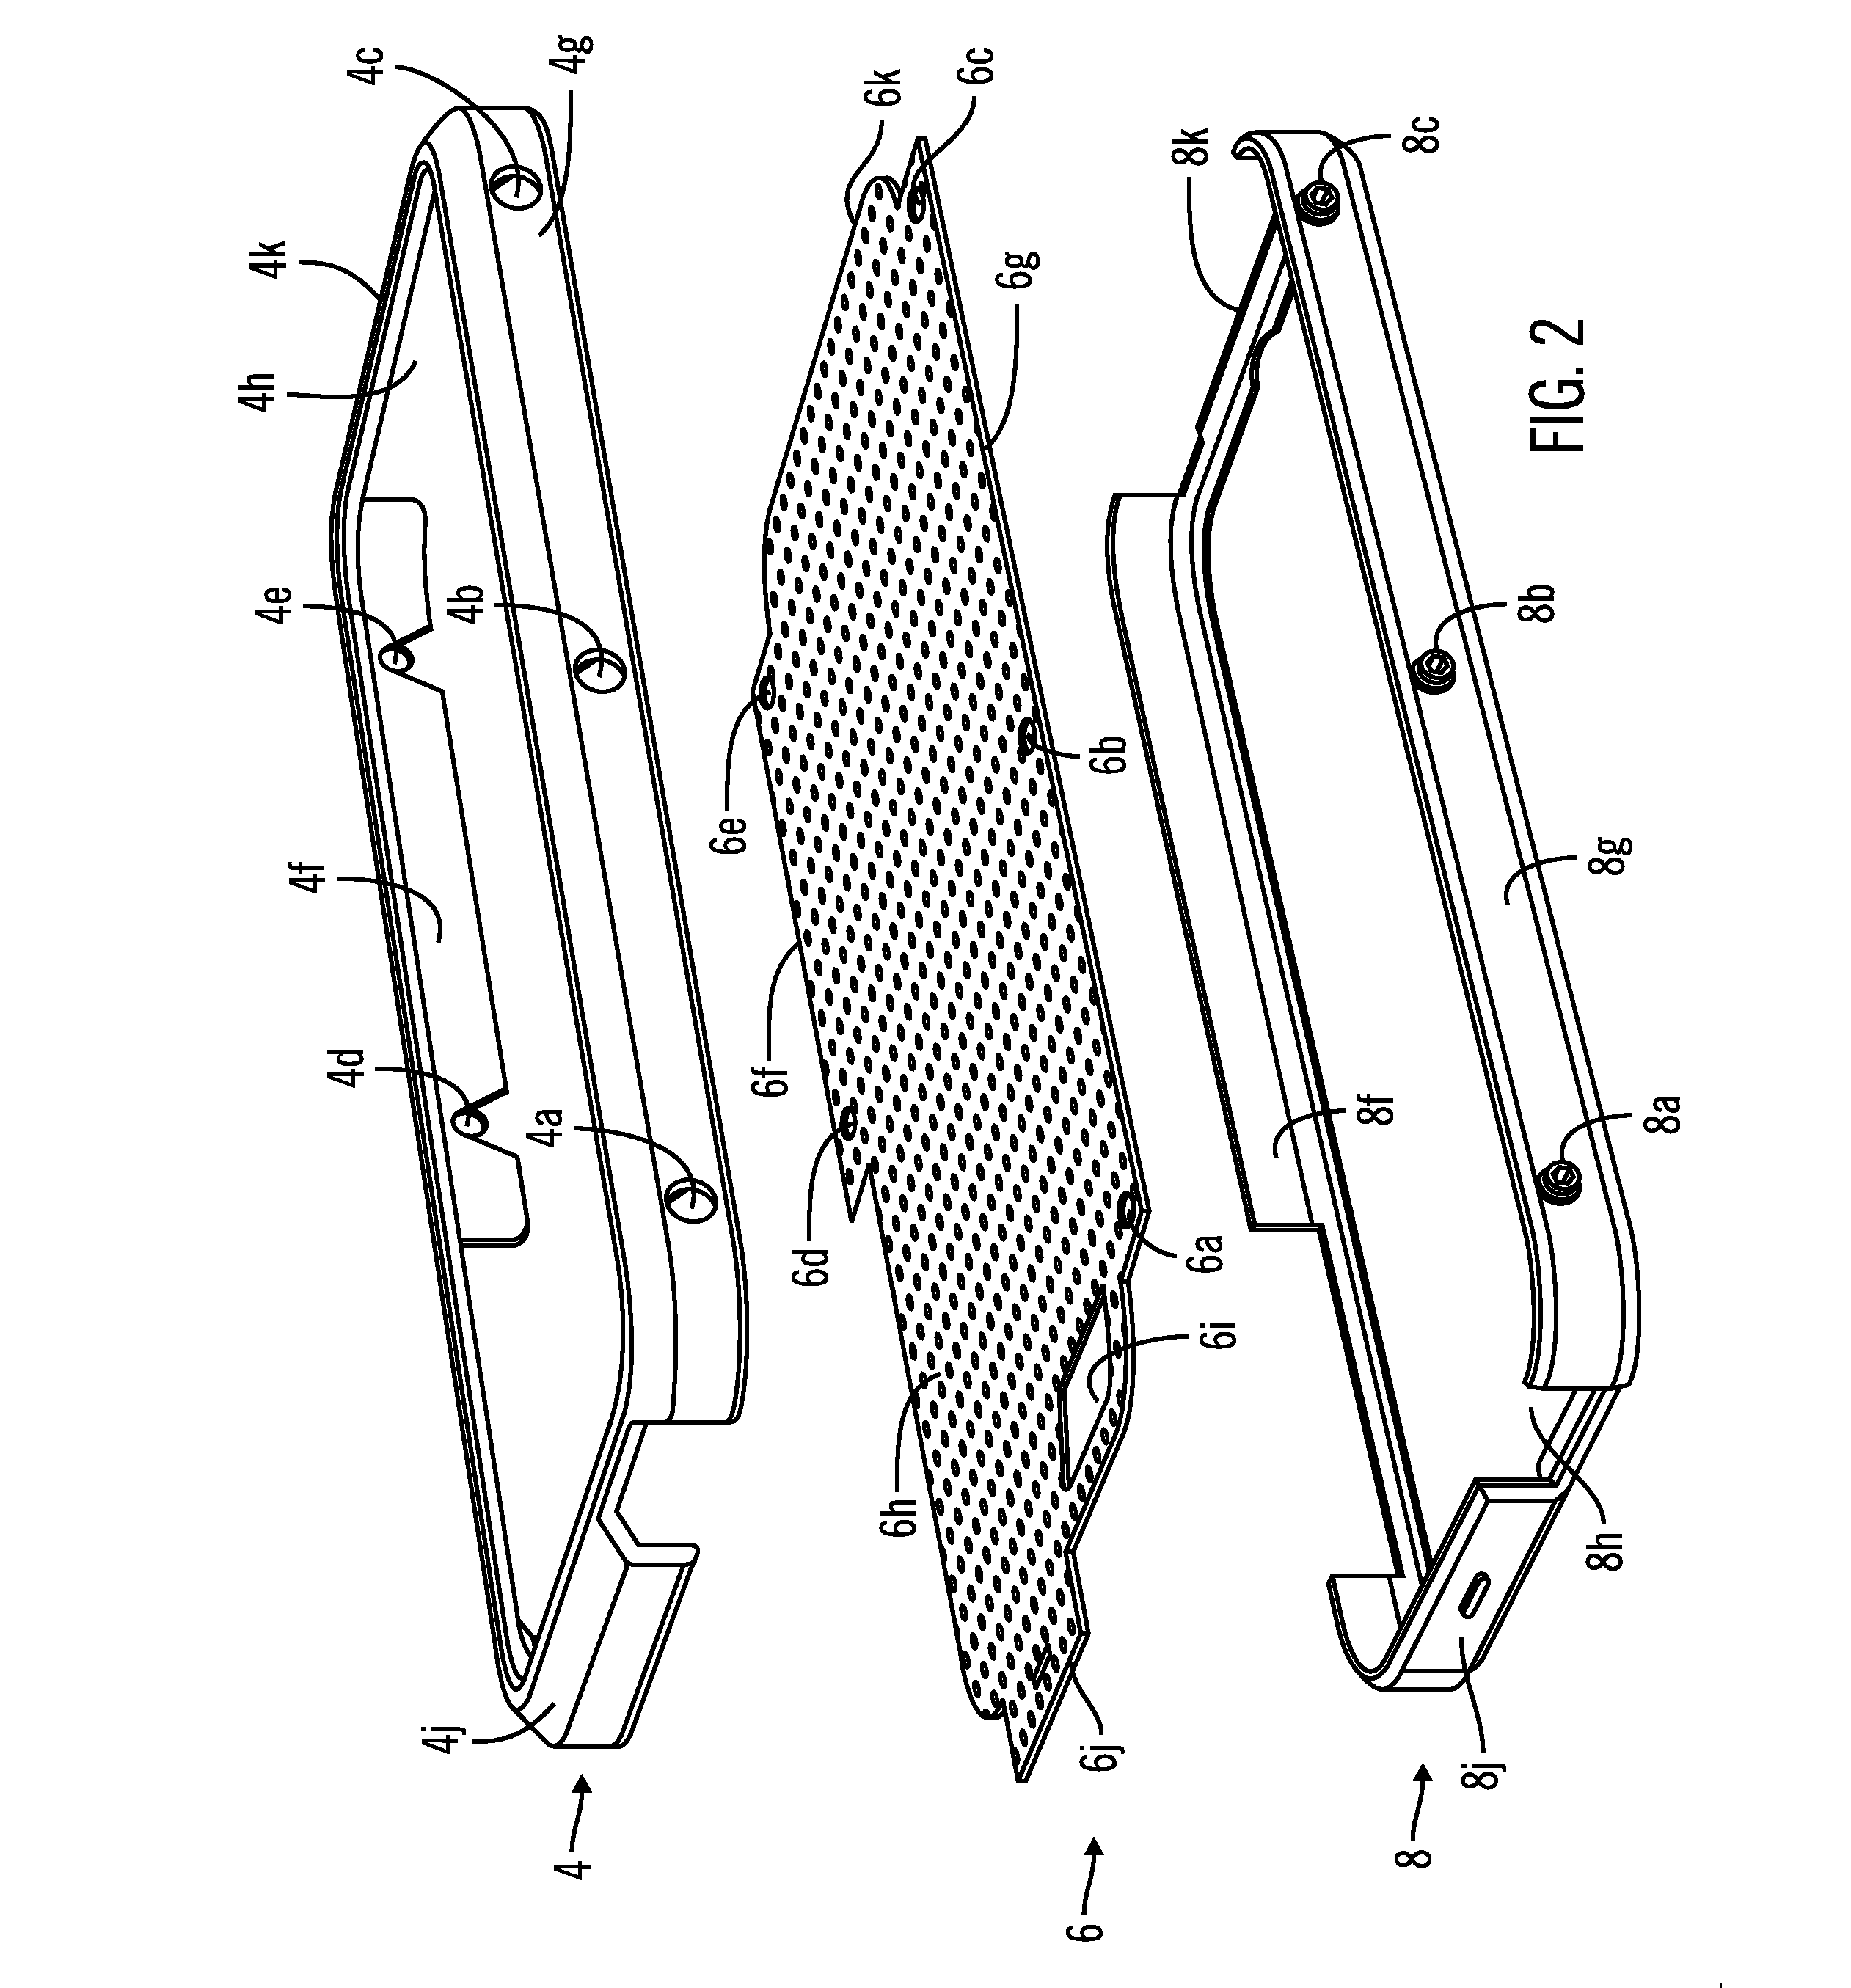 Case for a portable electronic device having rims and a material